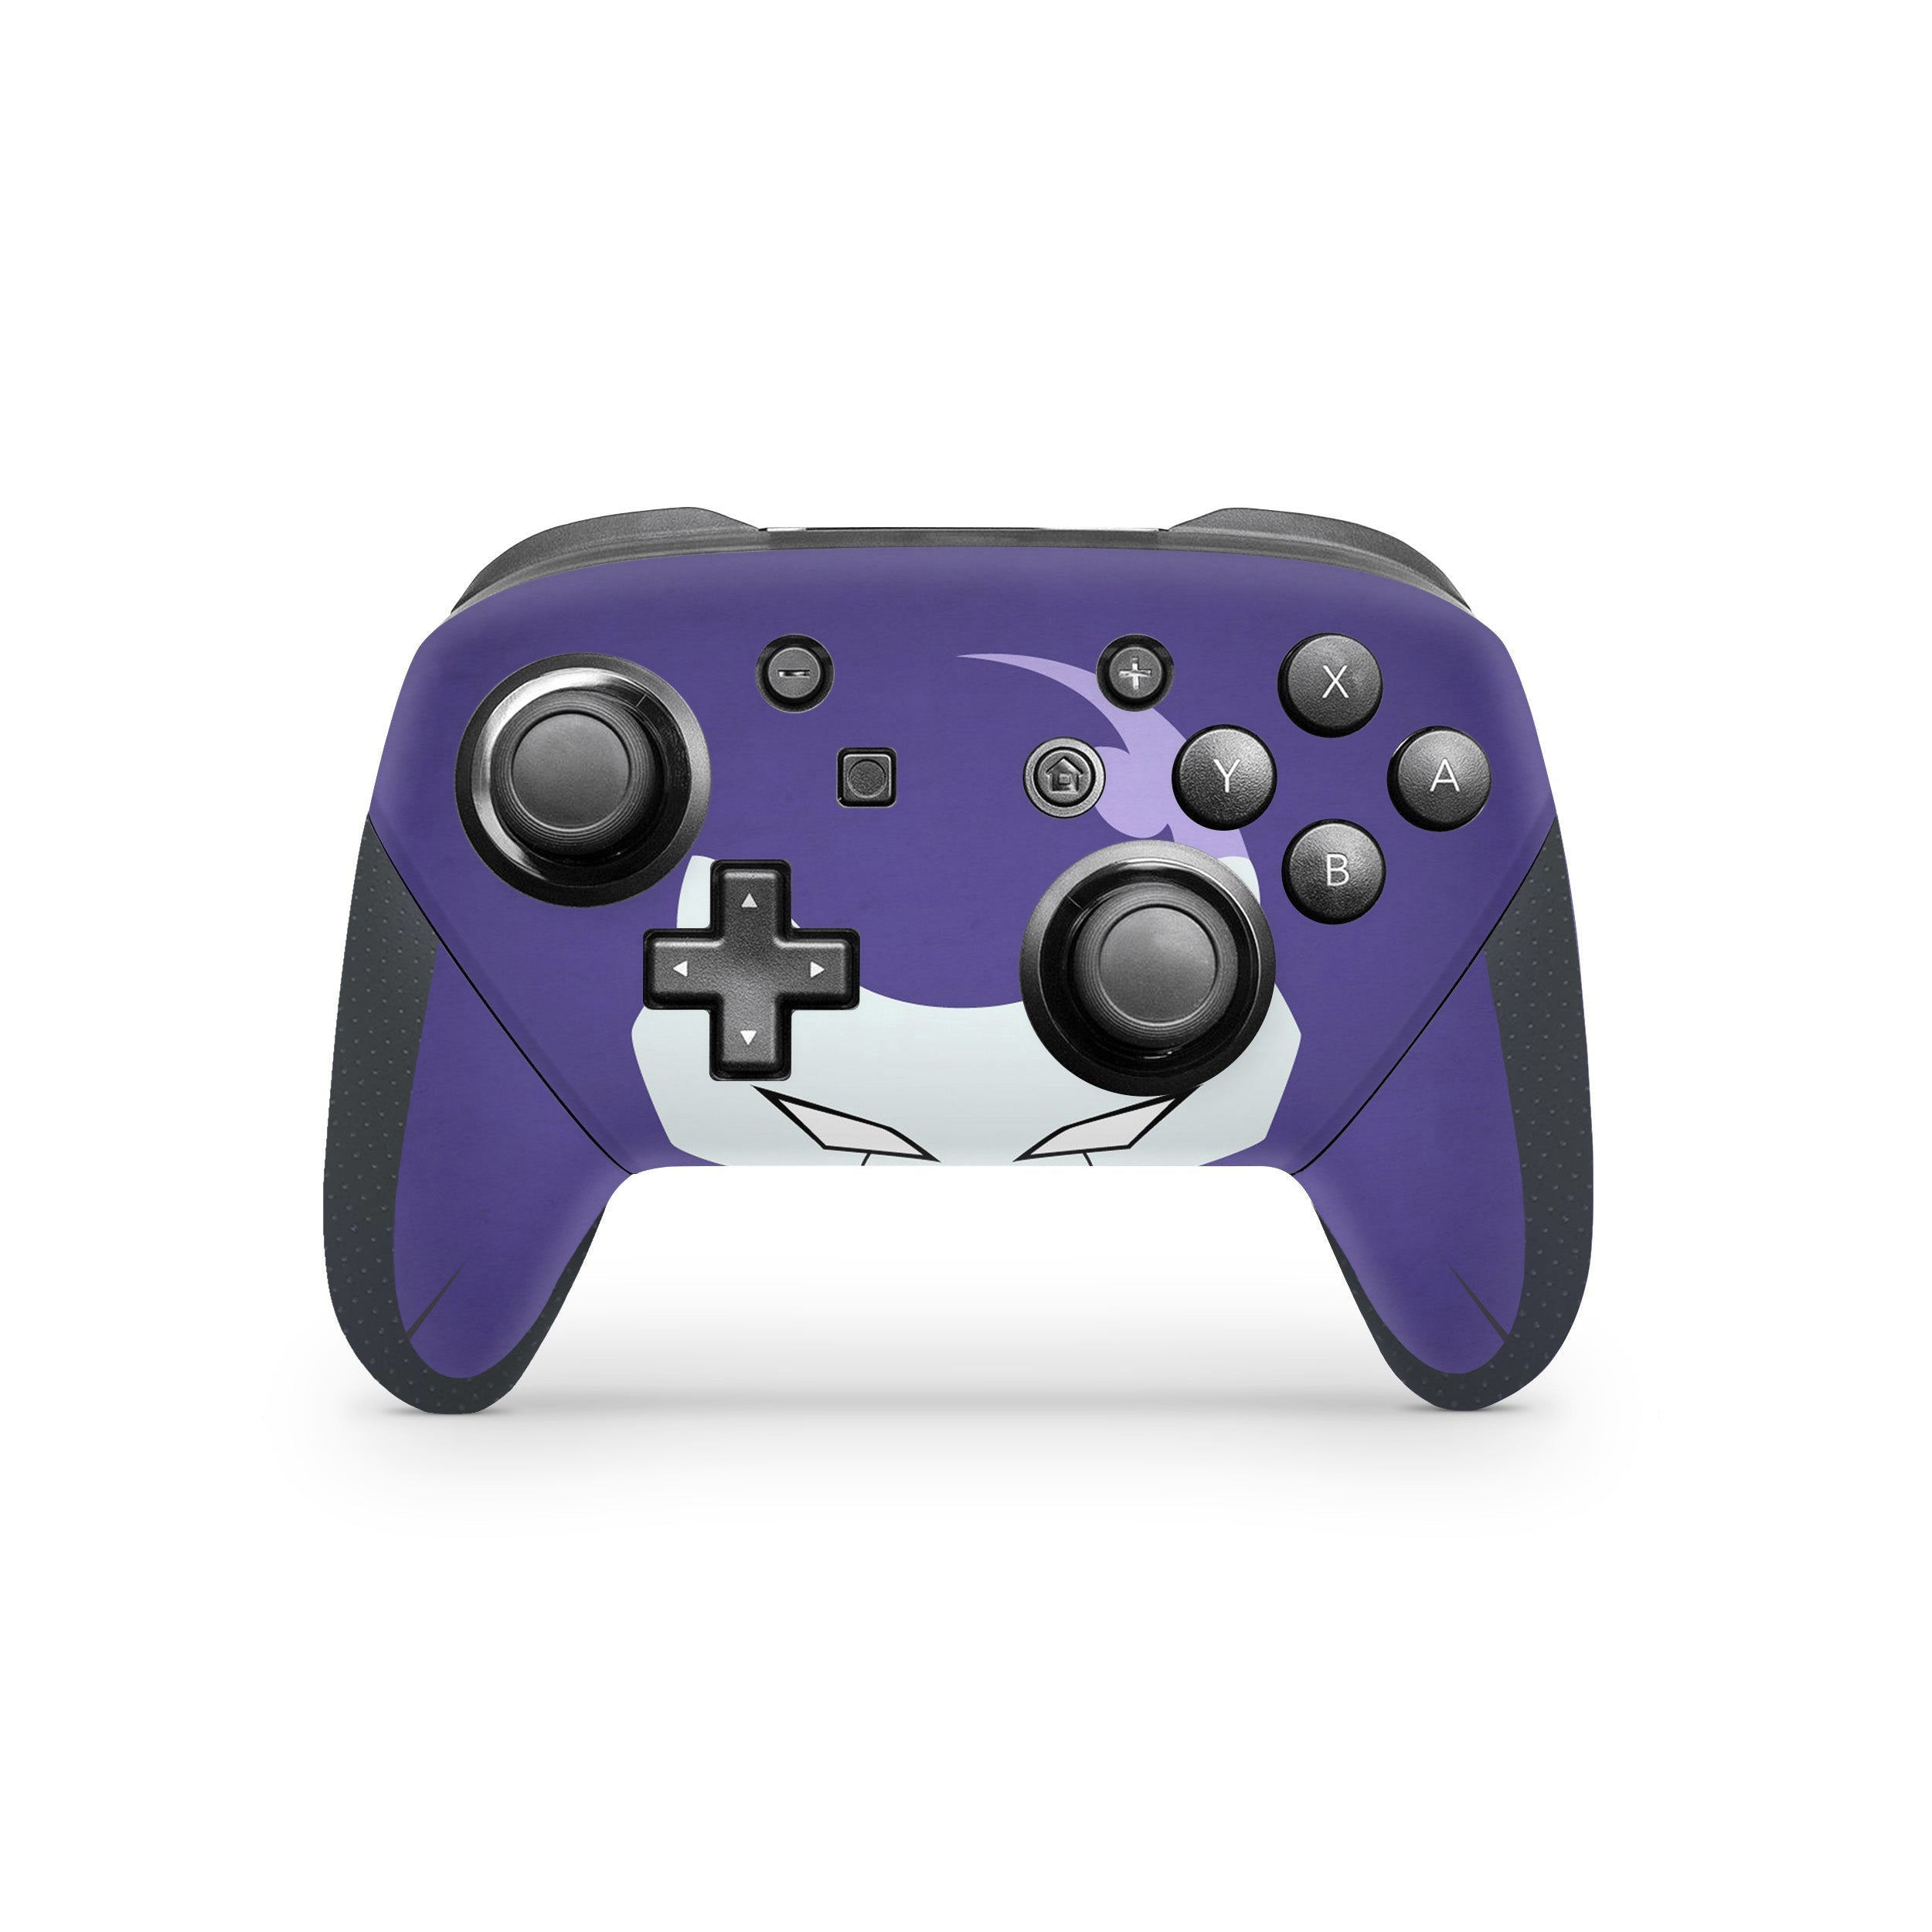 A video game skin featuring a Dragon Ball Z Frieza design for the Switch Pro Controller.